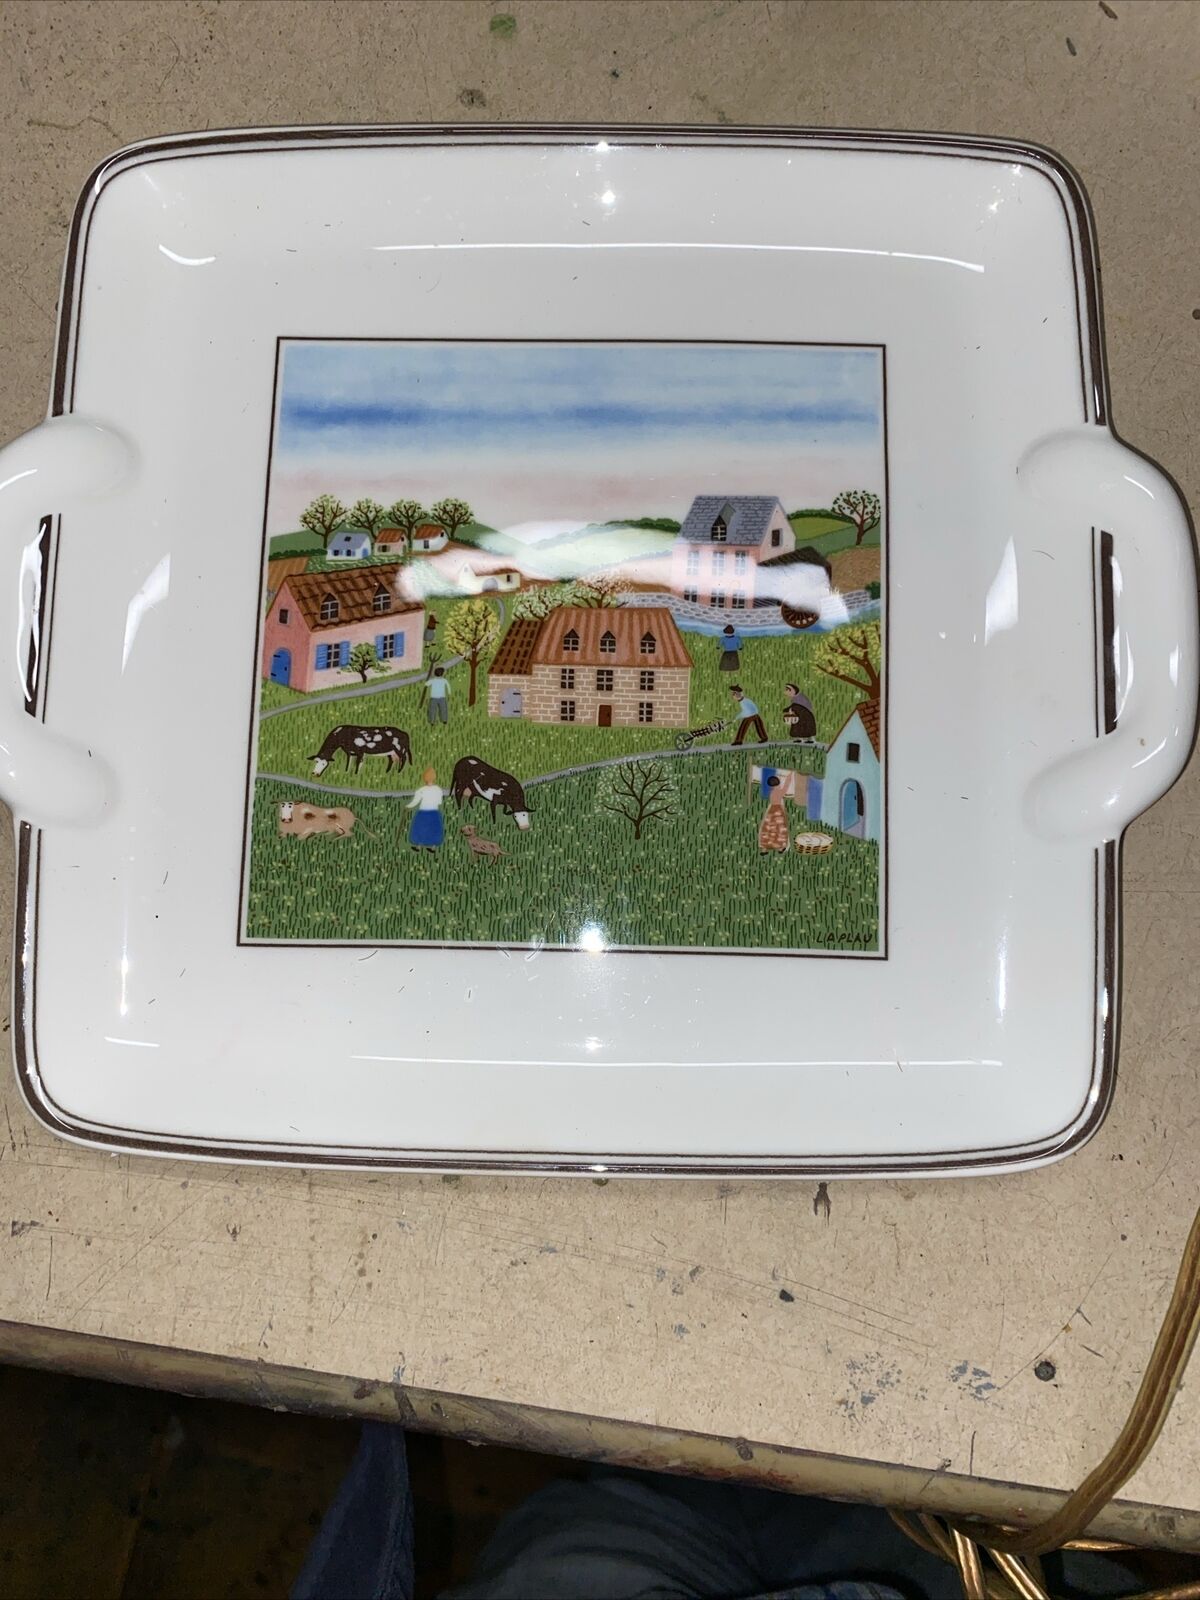 VILLEROY BOCH DESIGN NAIF SANDWICH TRAY 8x8 CHECK STORE HAVE ENTIRE SET